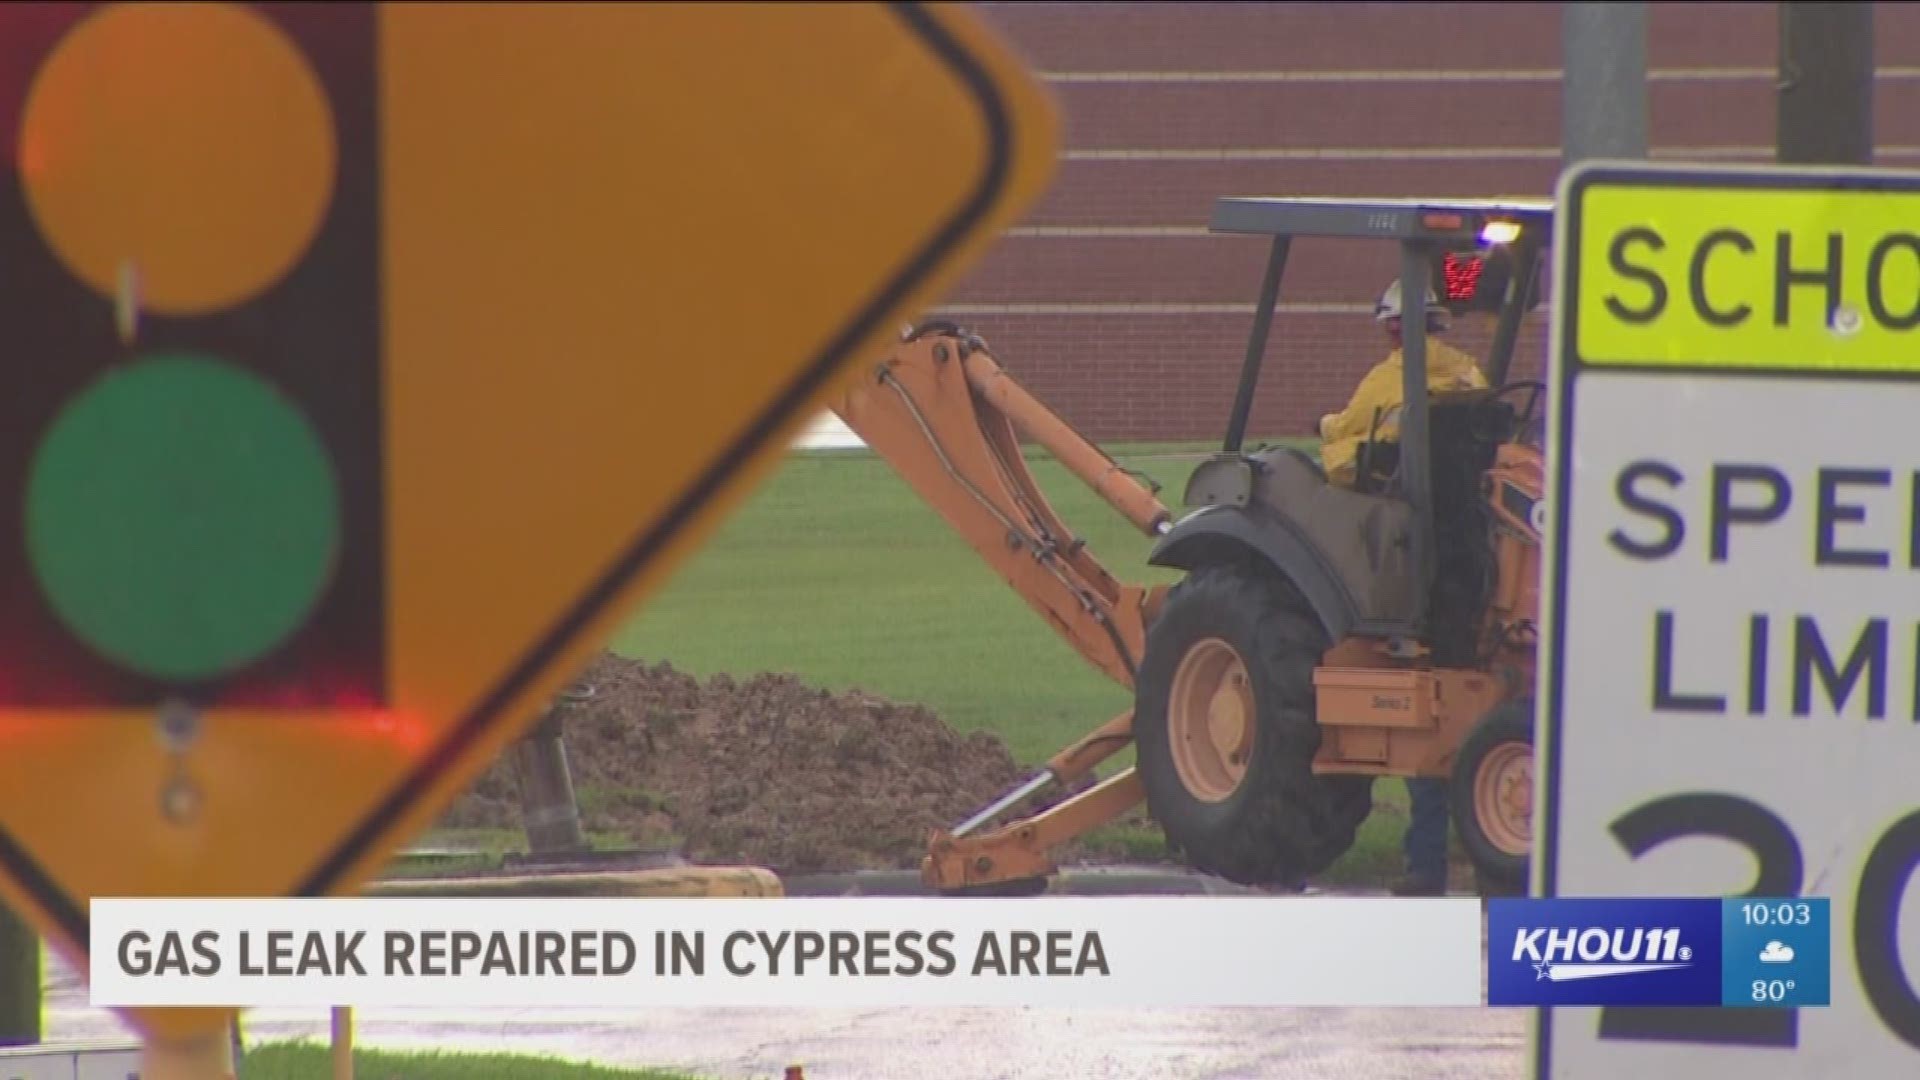 A major gas leak in the Cypress area has been repaired.